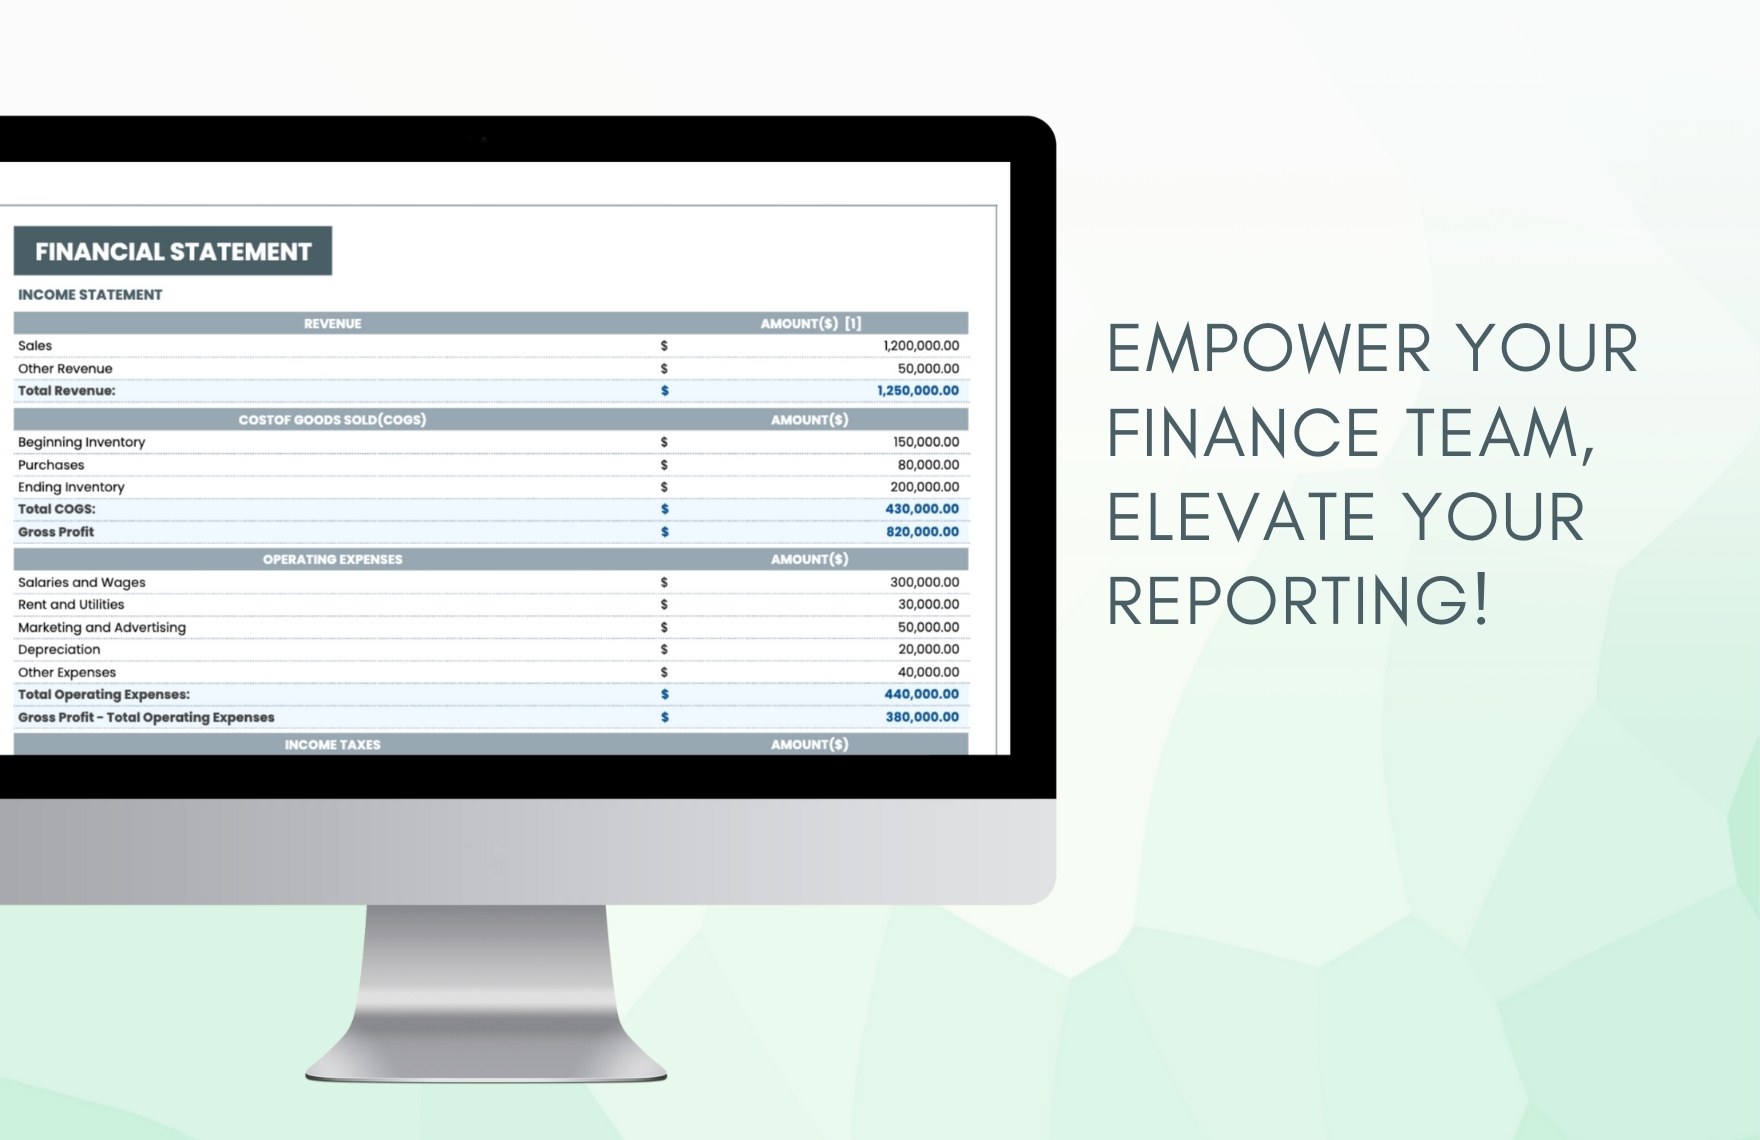 Financial Statement Automation Template